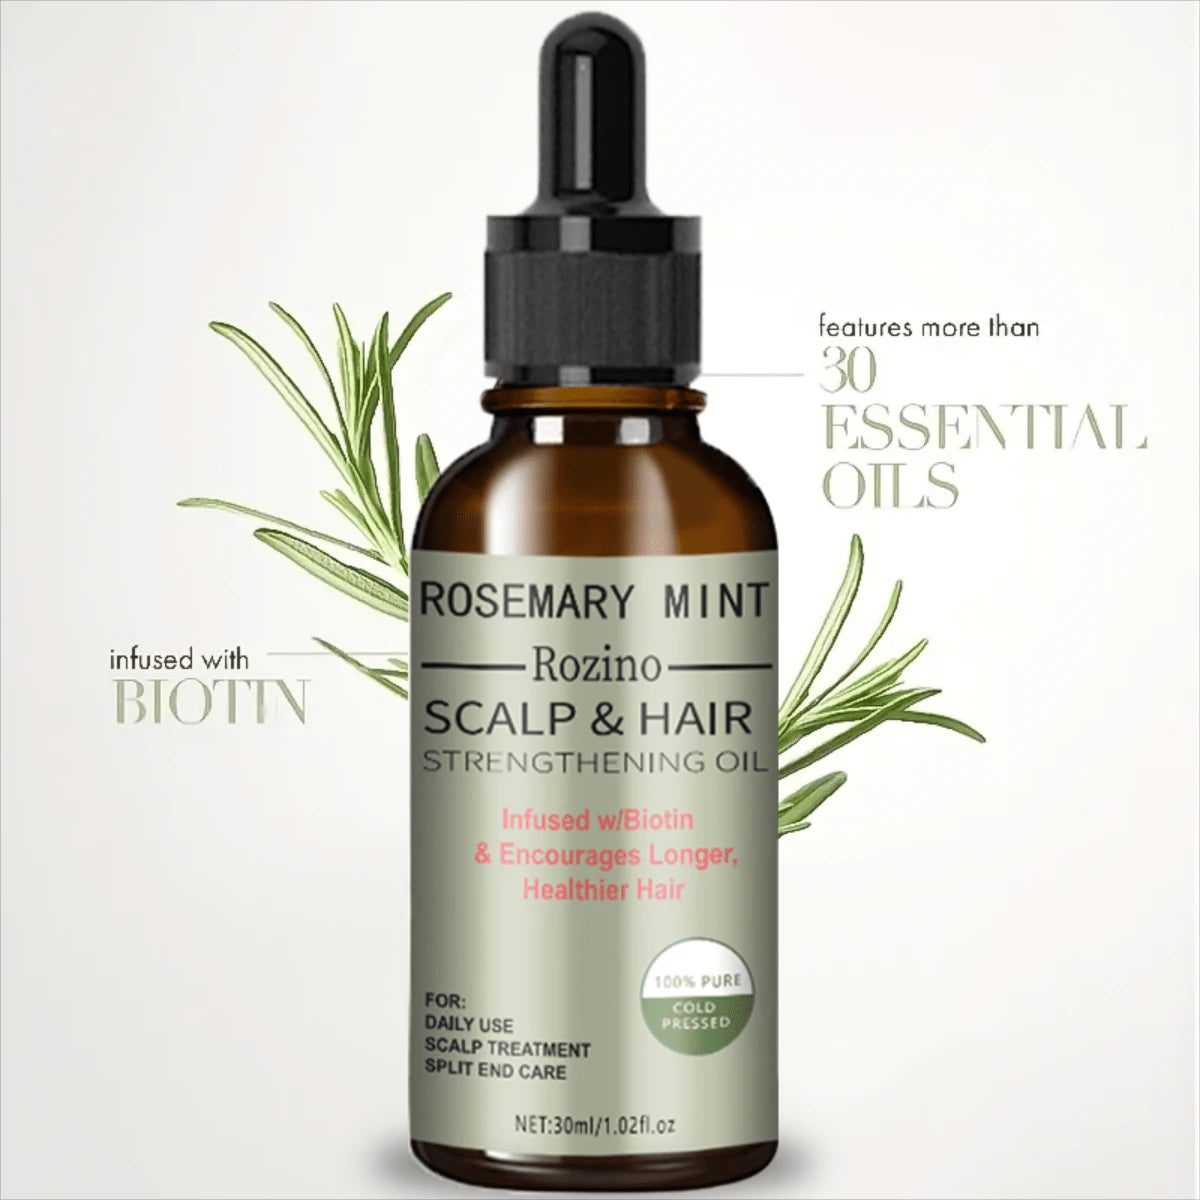 30ml Rosemary Peppermint Essential Oil - Ideal for Hair Conditioning, Nourishing, and Repairing. Suitable for All Hair Types, including Split Ends Treatment.